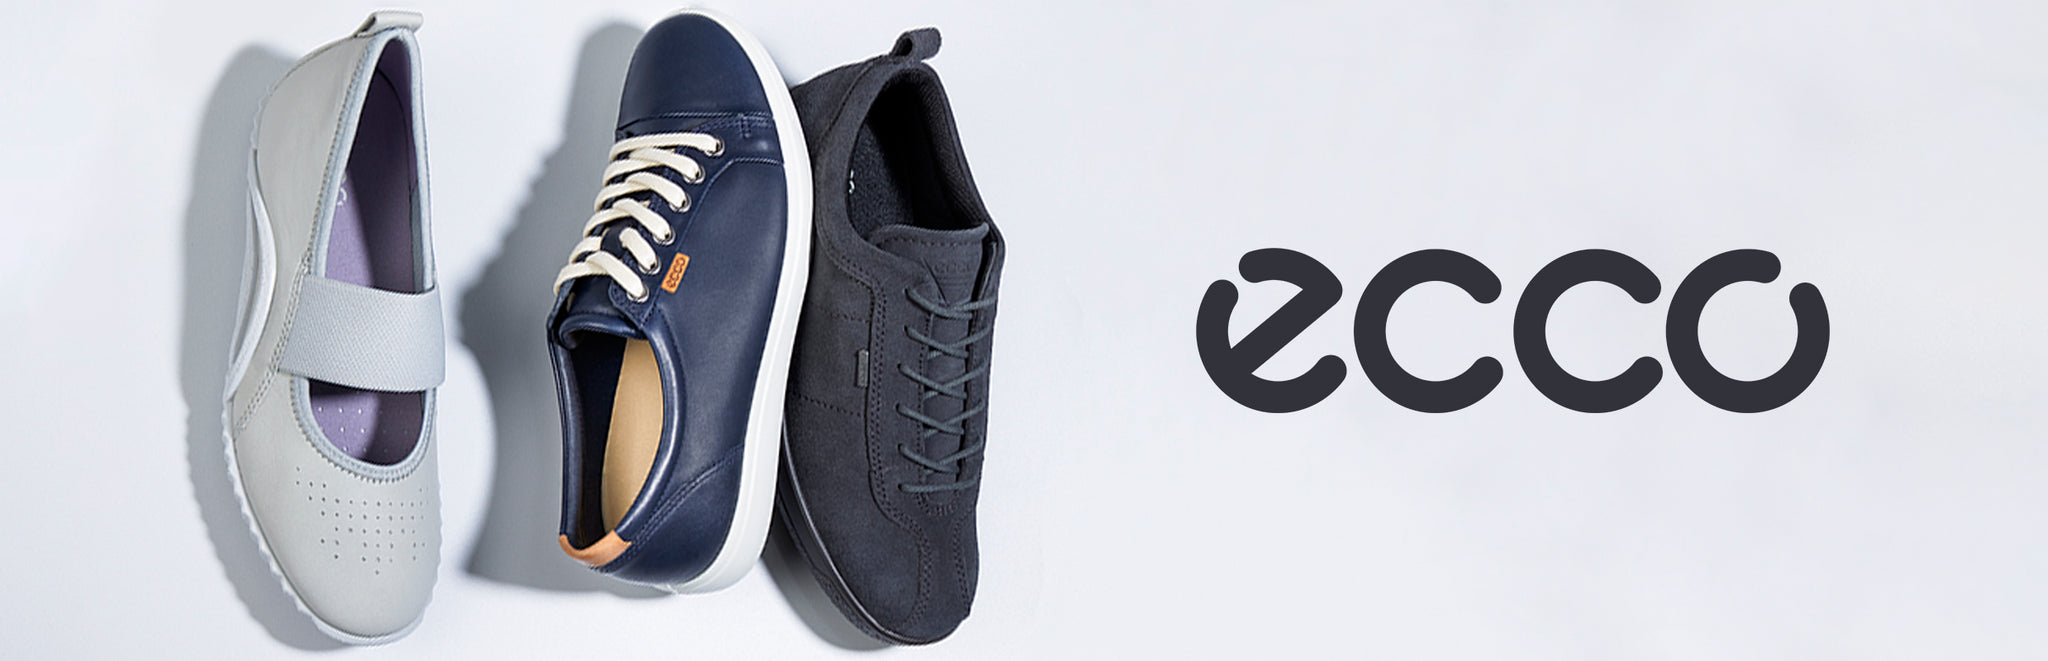 ecco shoes stockists exeter